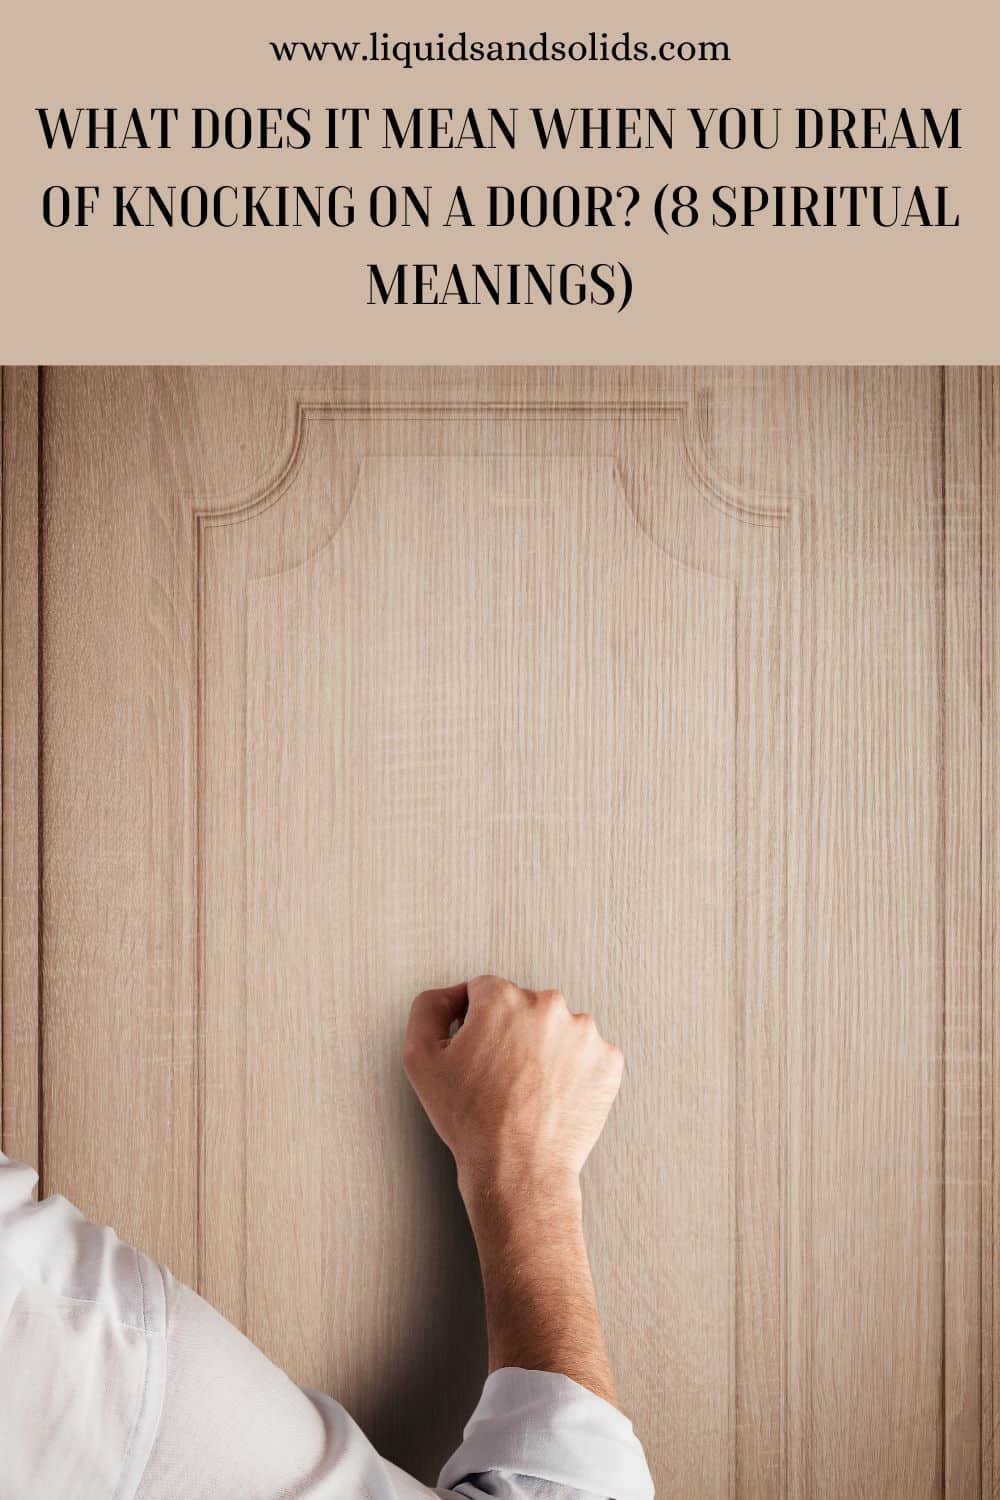 What Does It Mean When You Dream Of Knocking On A Door? (8 Spiritual Meanings)